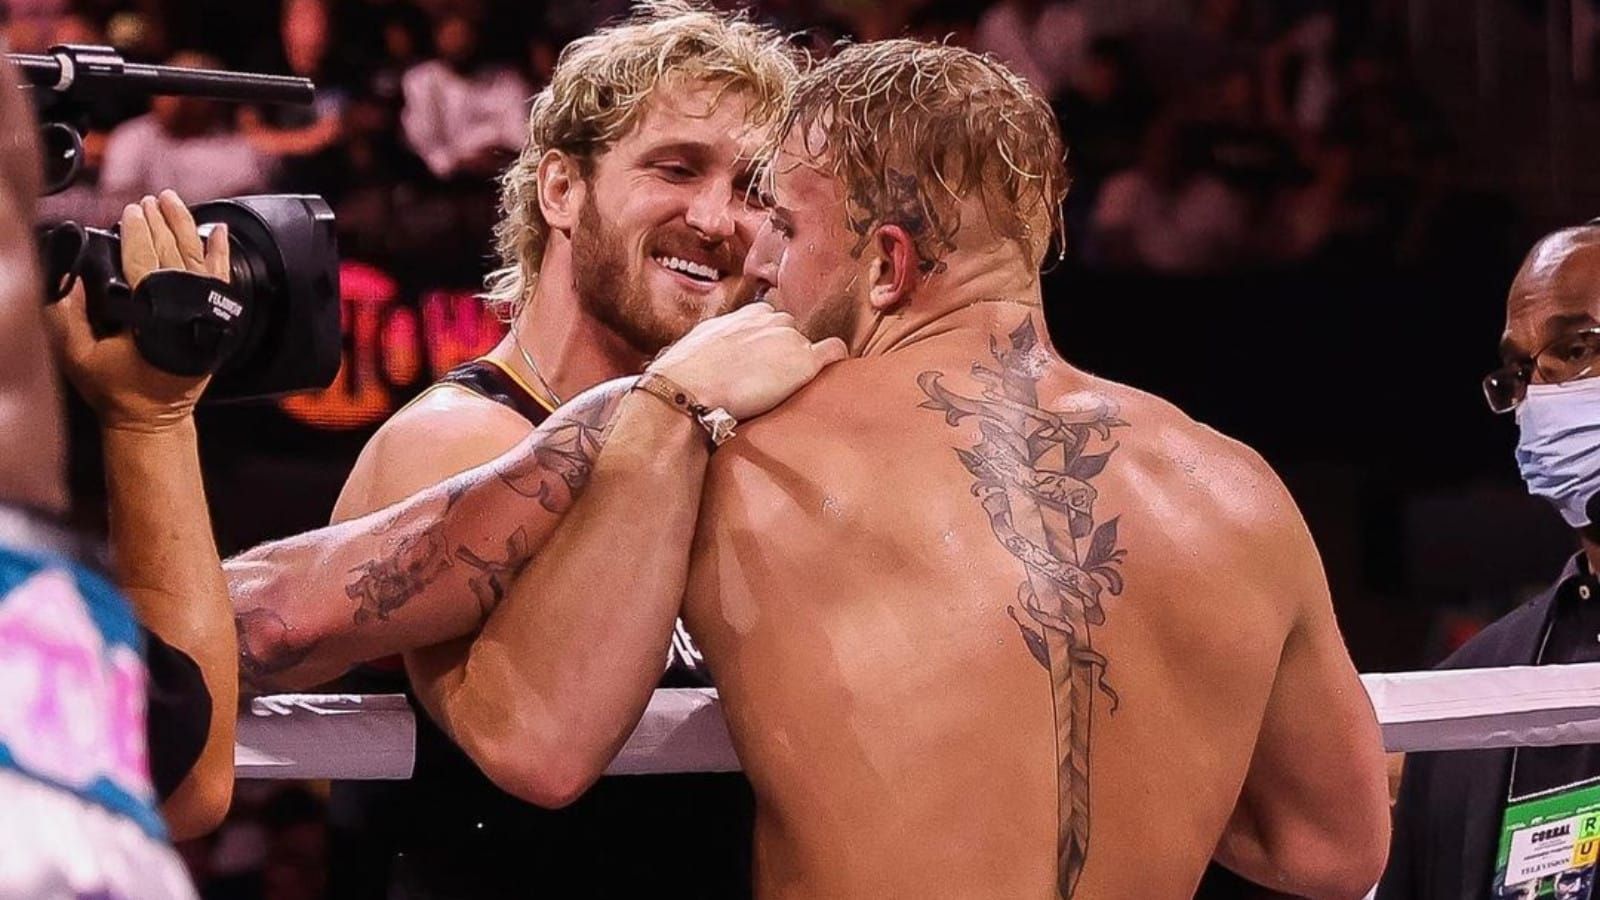 Jake Paul could follow Logan into WWE someday